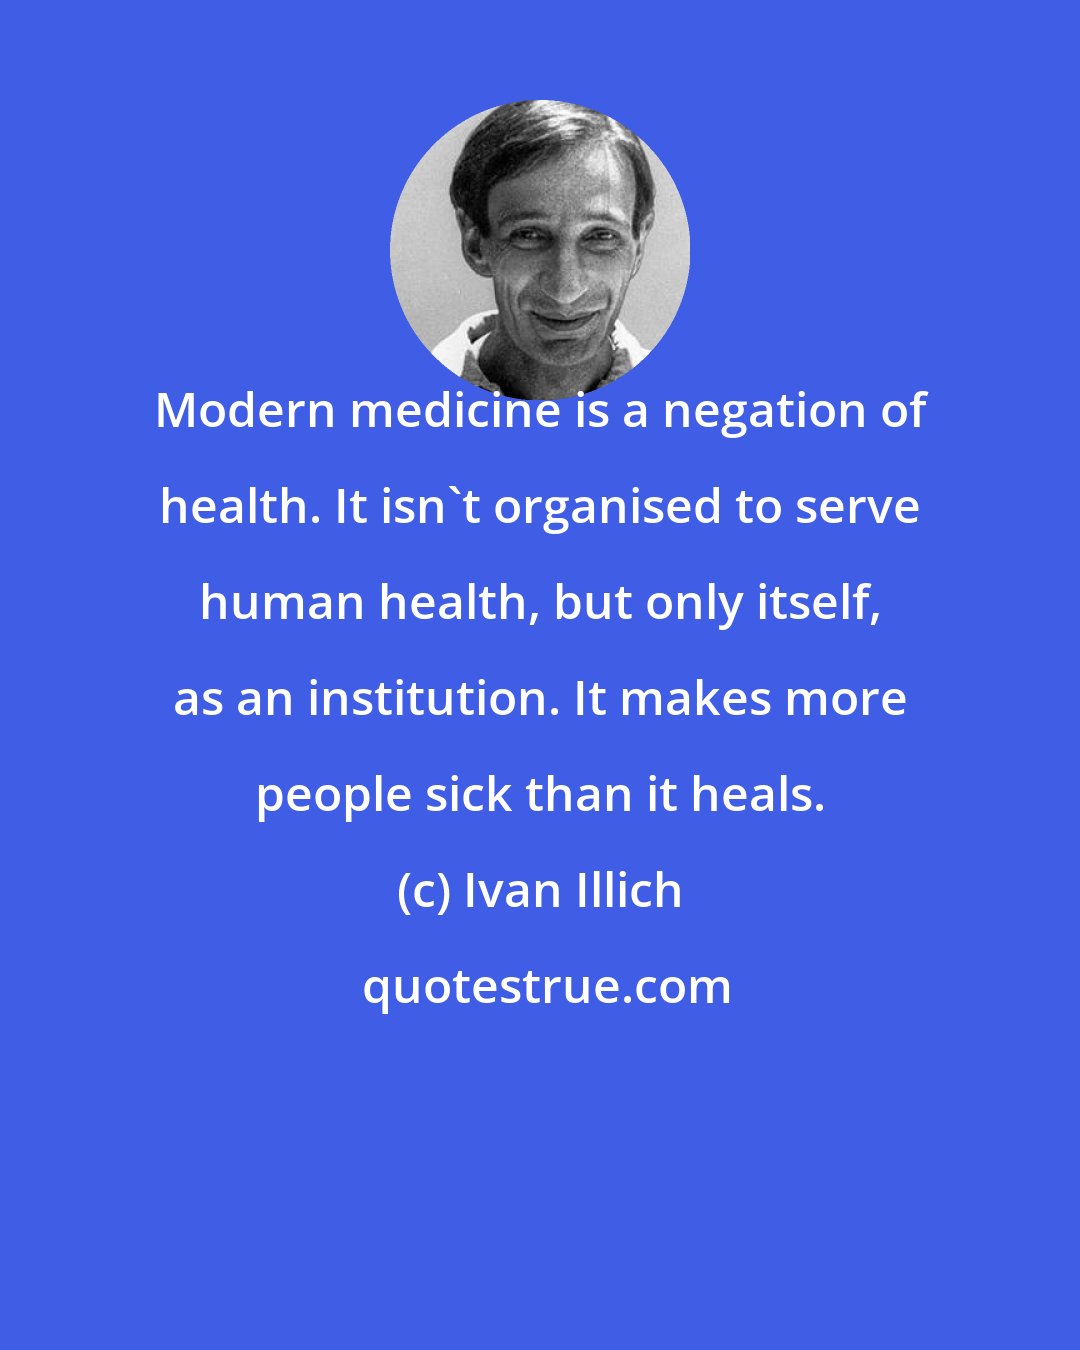 Ivan Illich: Modern medicine is a negation of health. It isn't organised to serve human health, but only itself, as an institution. It makes more people sick than it heals.